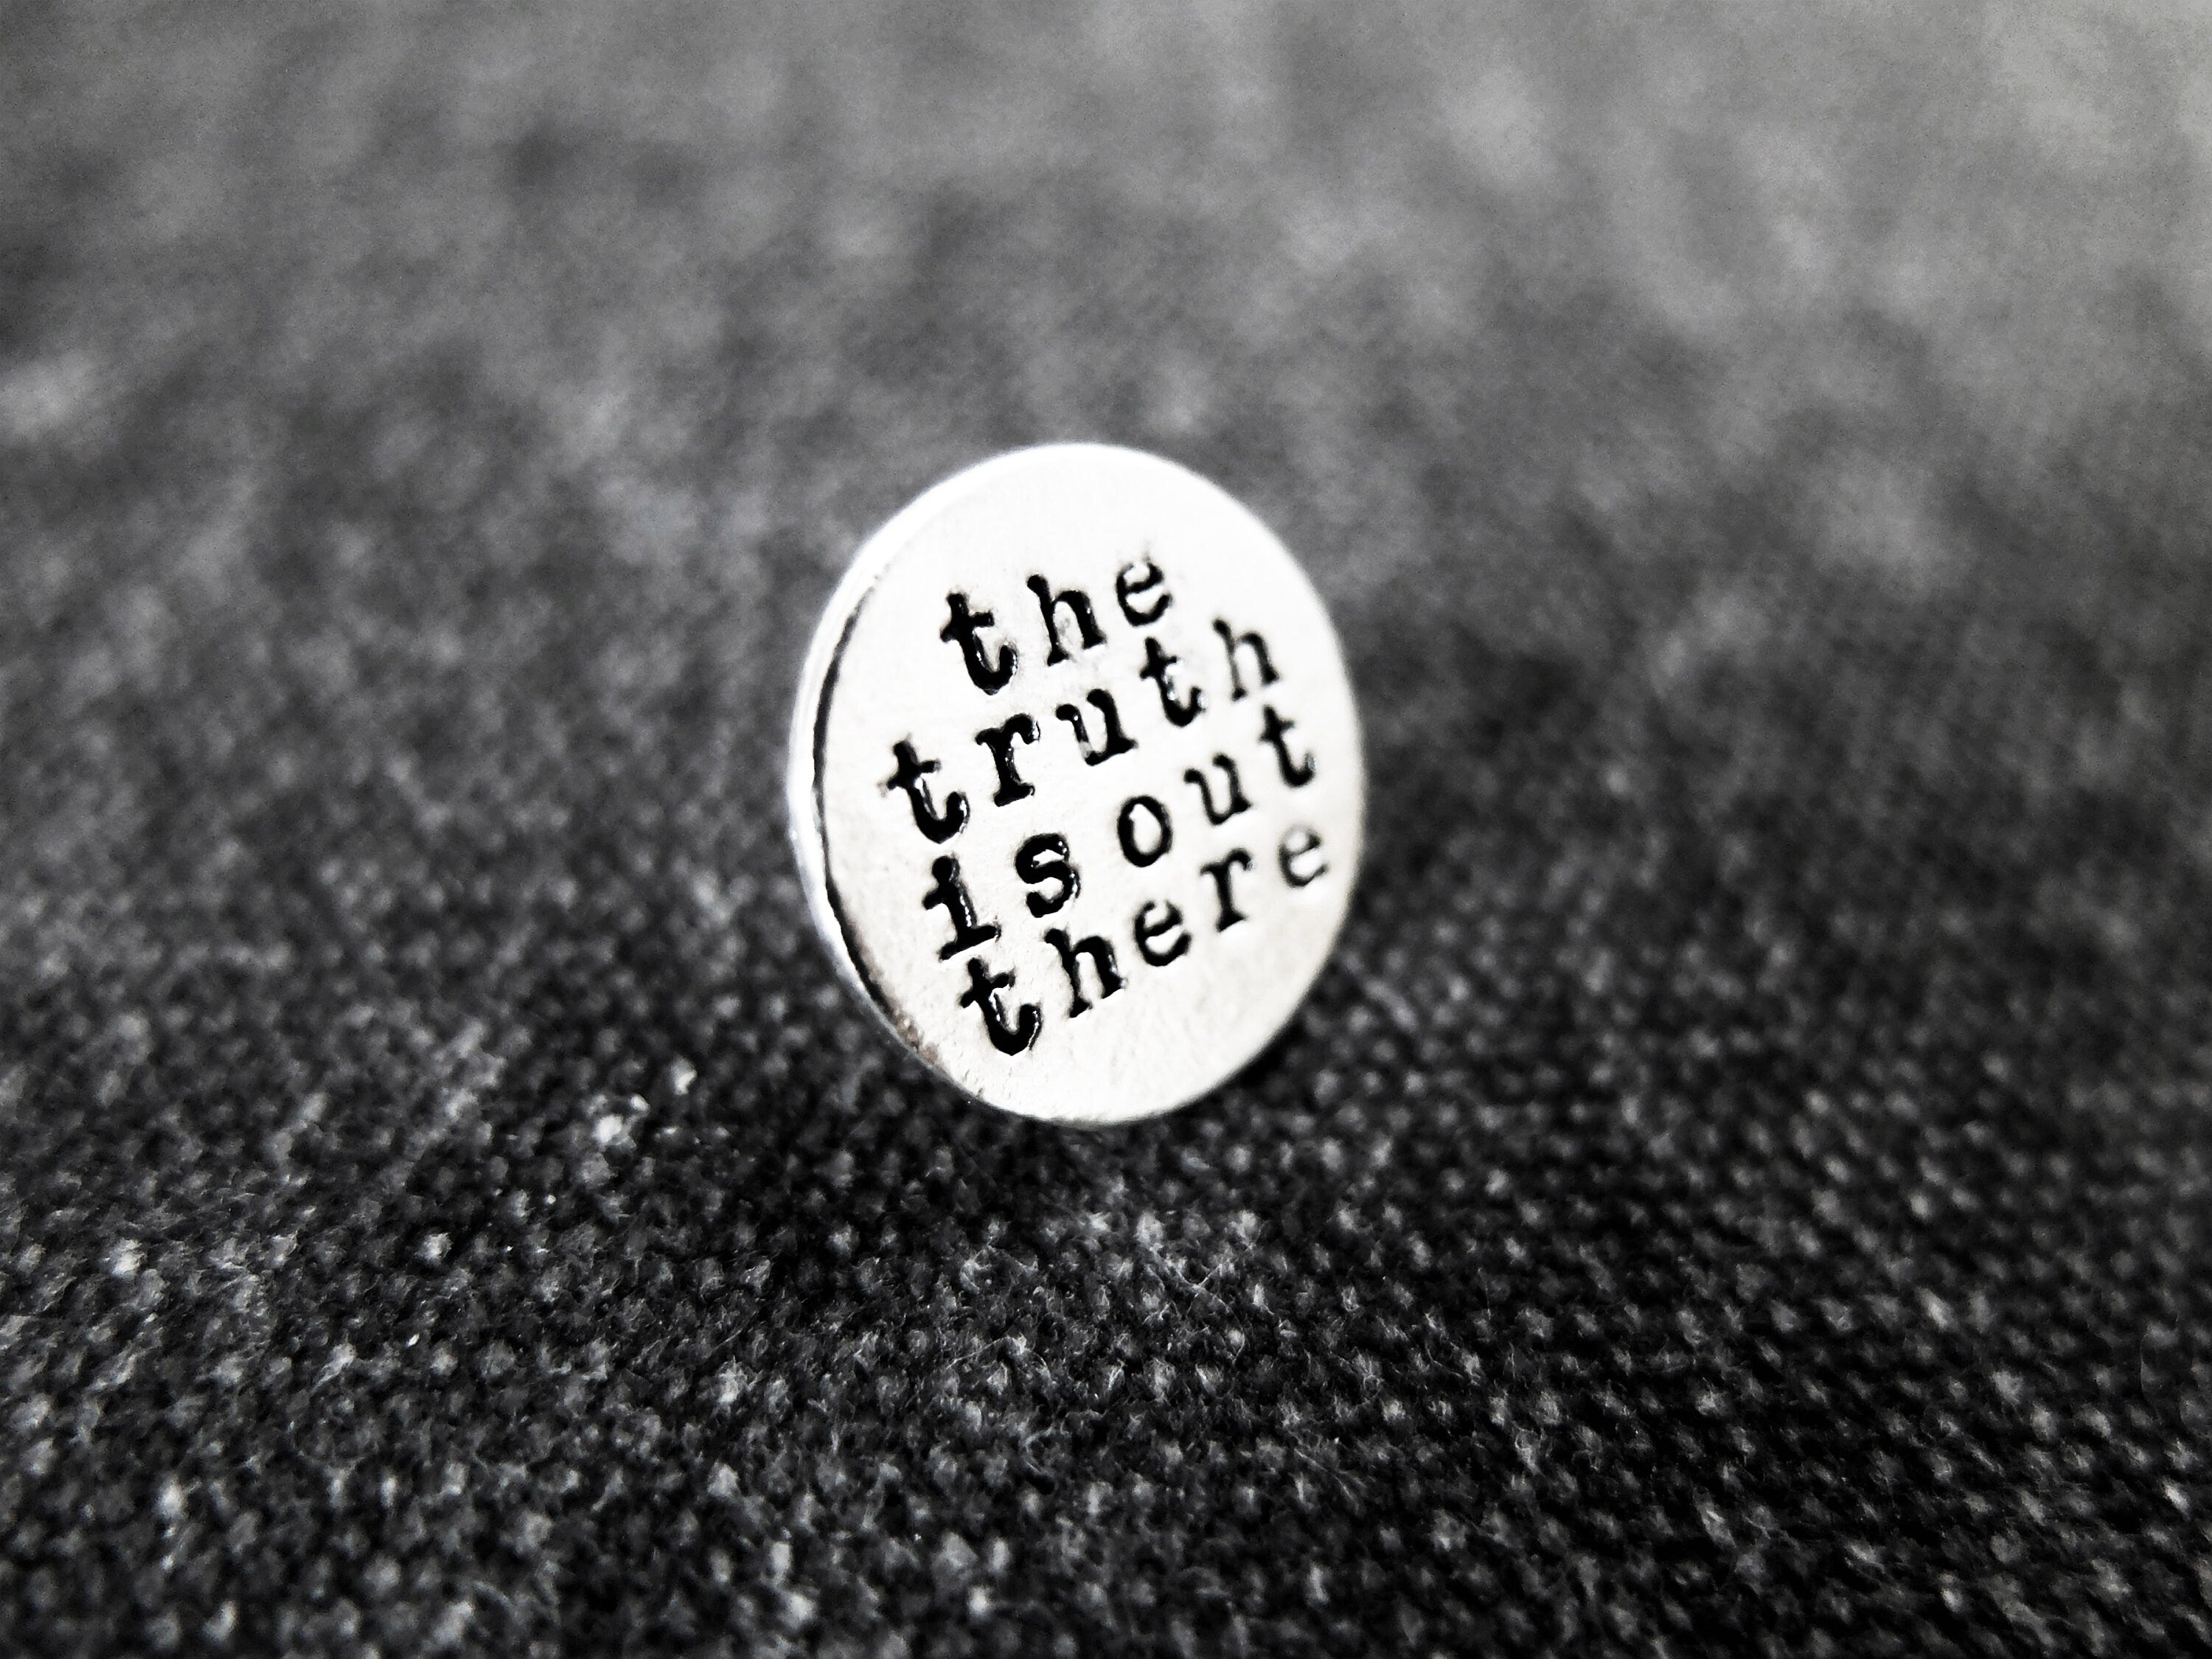 Handmade Sterling Silver Truth Is Out There Pin - Mulder / Scully Lapel Pin / Badge - X-Files Geek Tie Tack